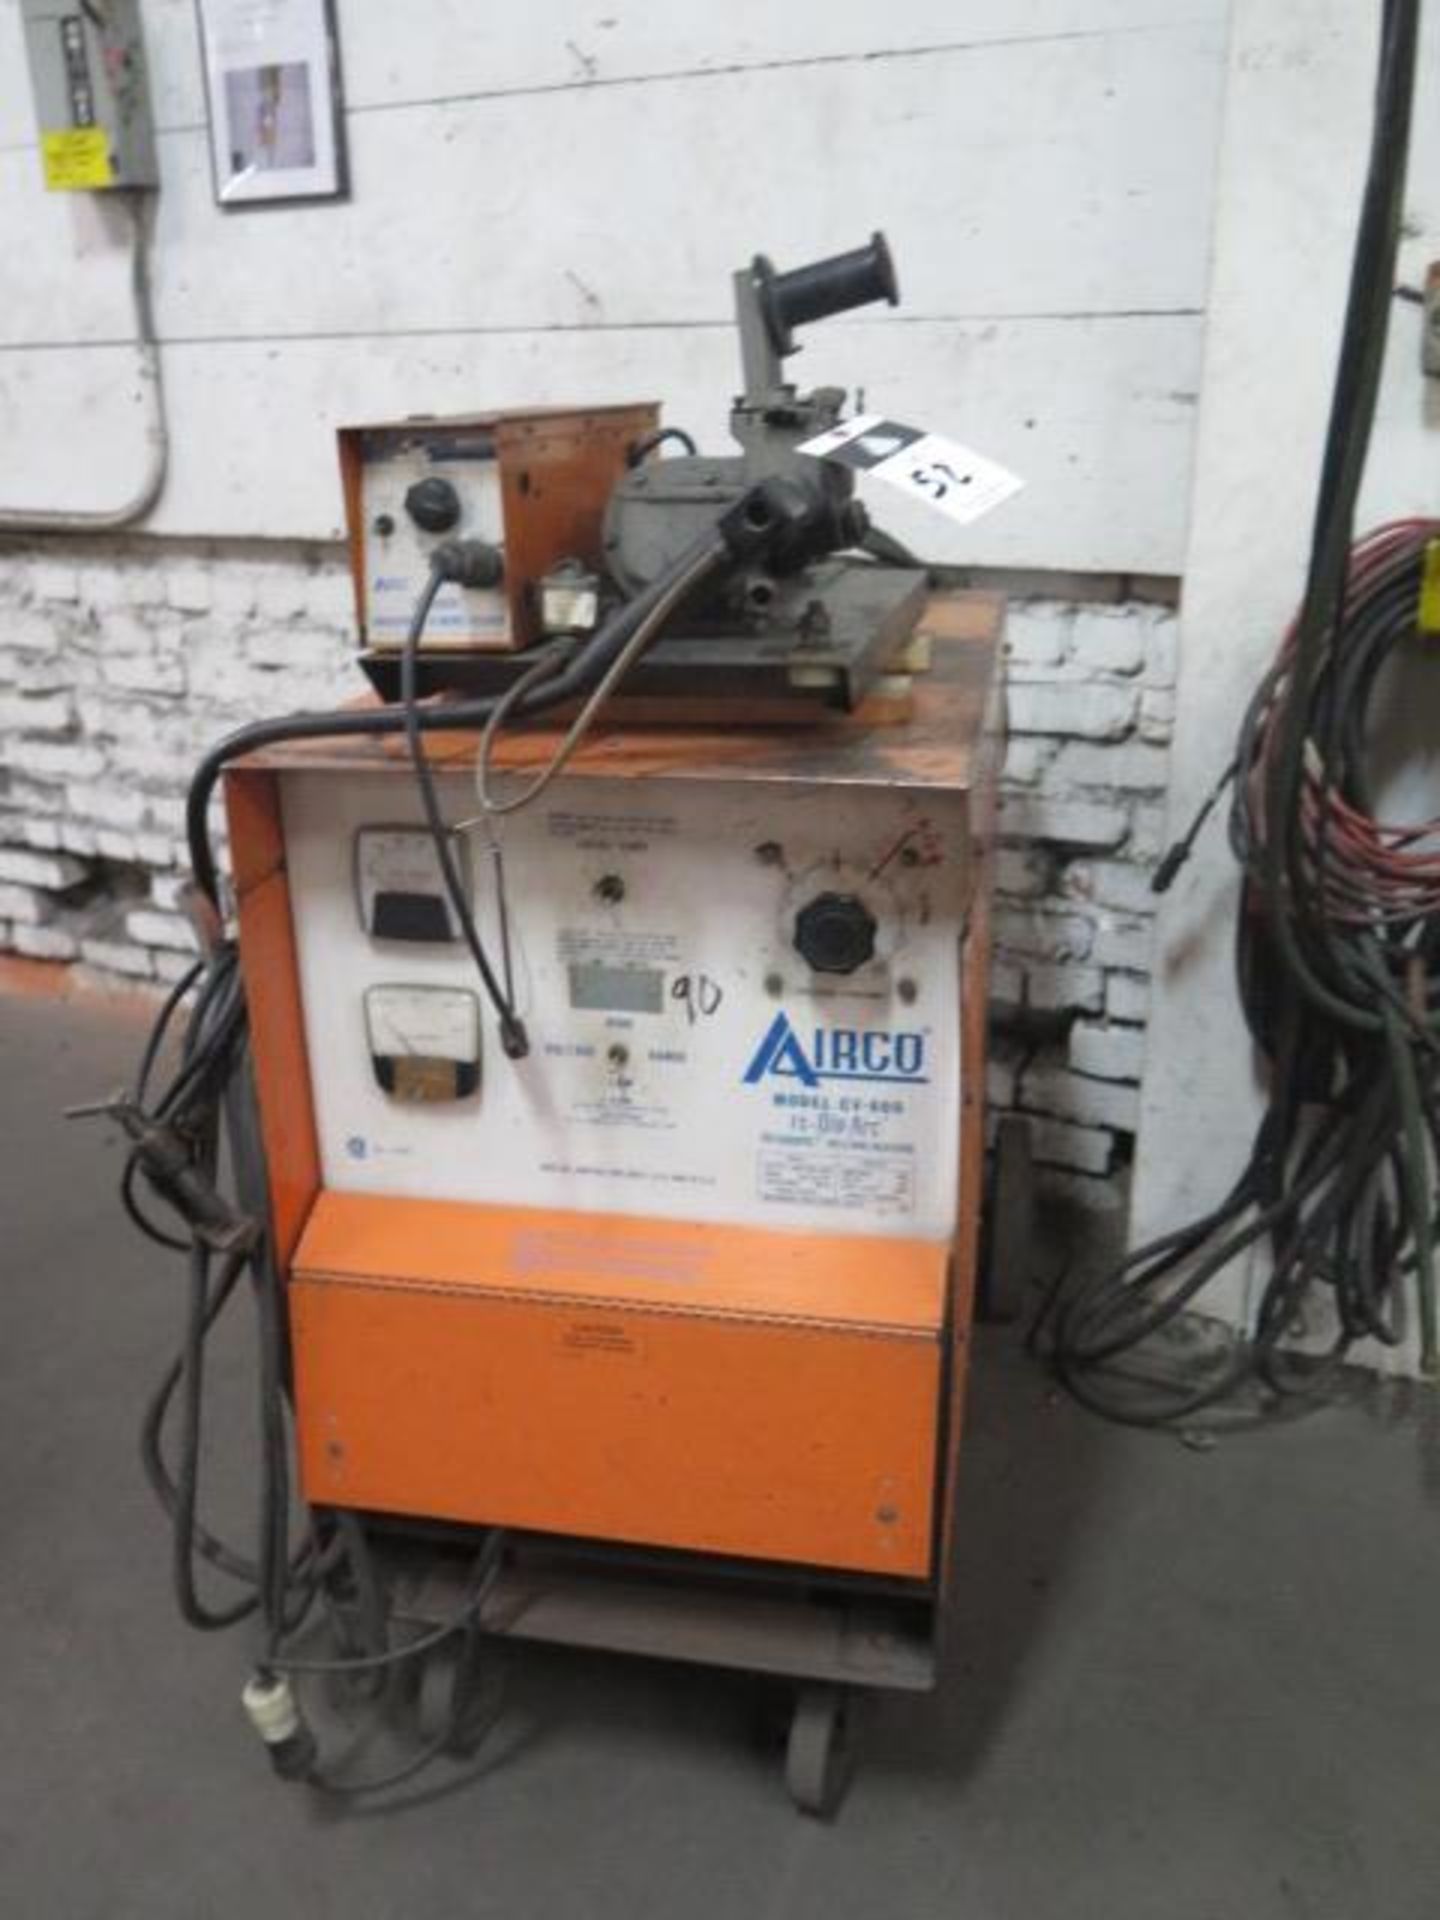 Airco CV-600 FC-Dip Arc Welding Power Source w/ Miller 60 Series Wire Feeder (SOLD AS-IS - NO